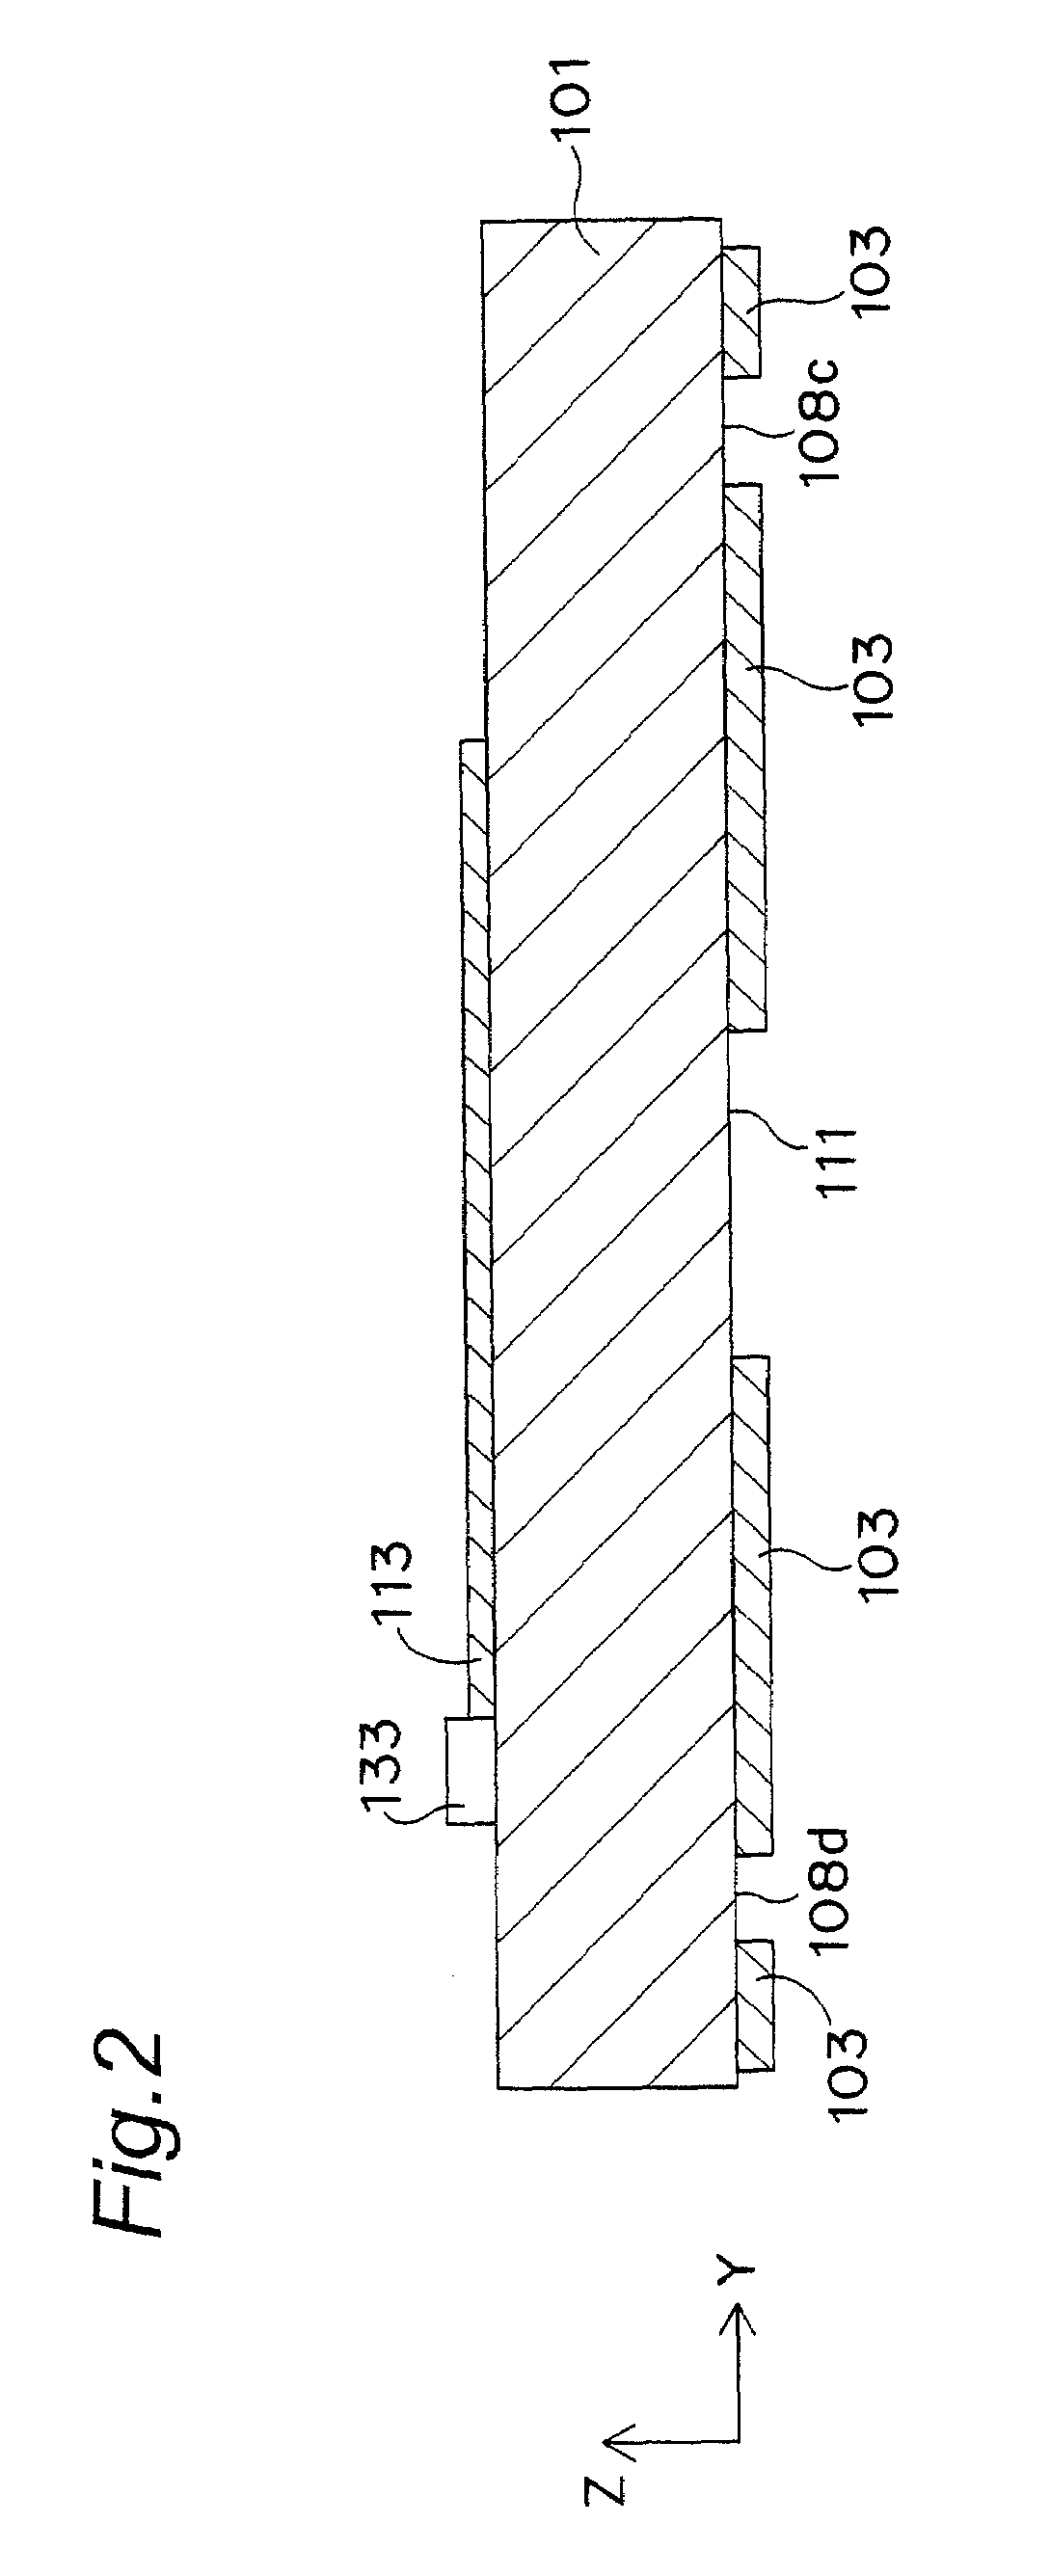 Wide-band slot antenna apparatus with stop band